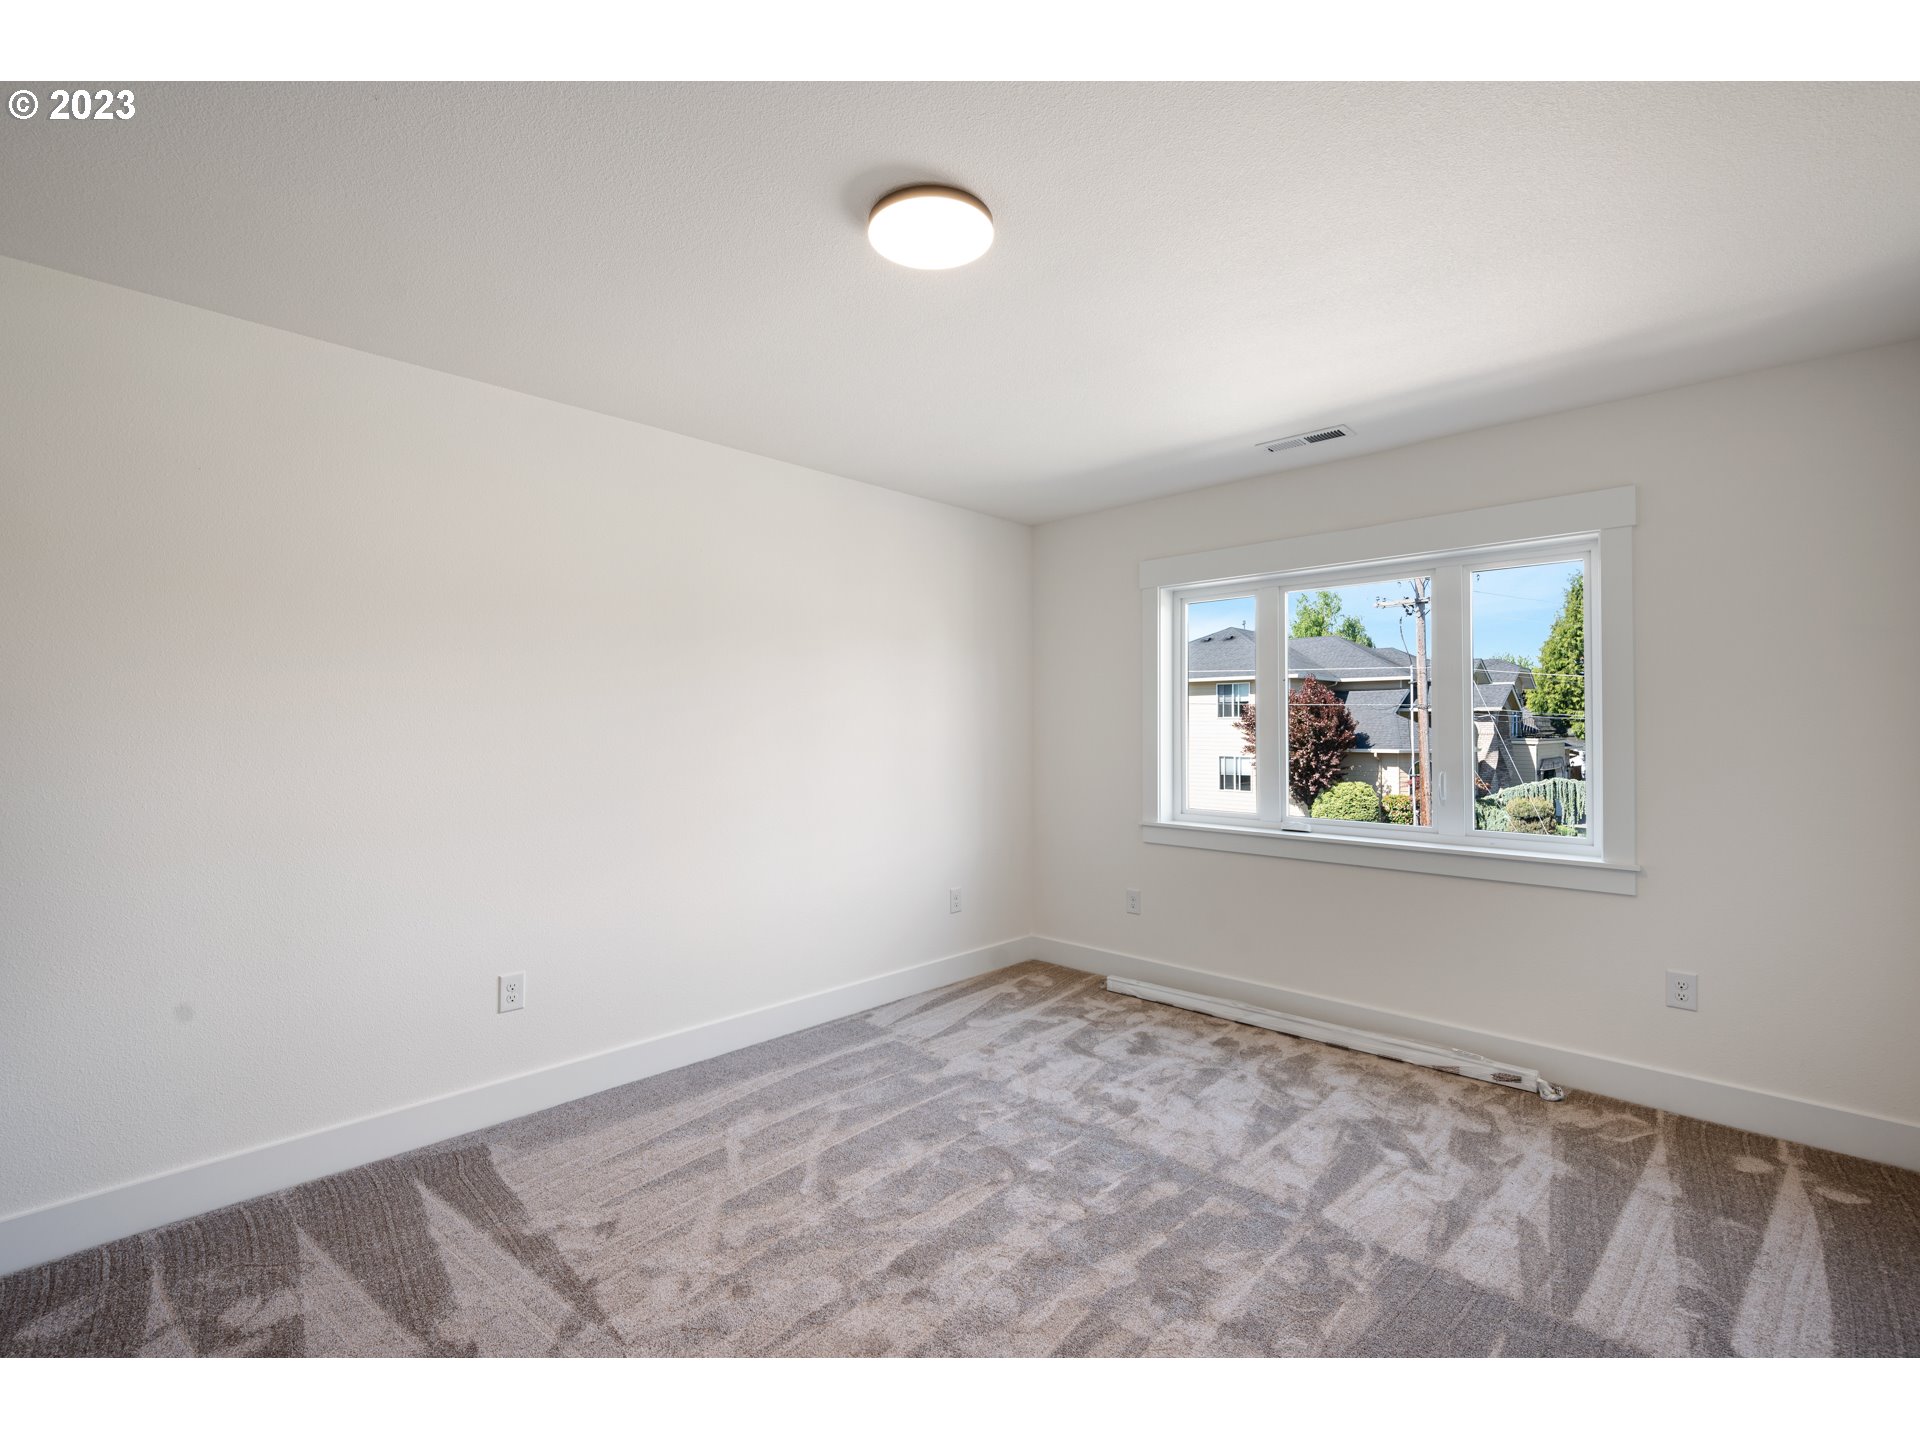 11813 NW 38th Ave #4, Vancouver, WA 98685